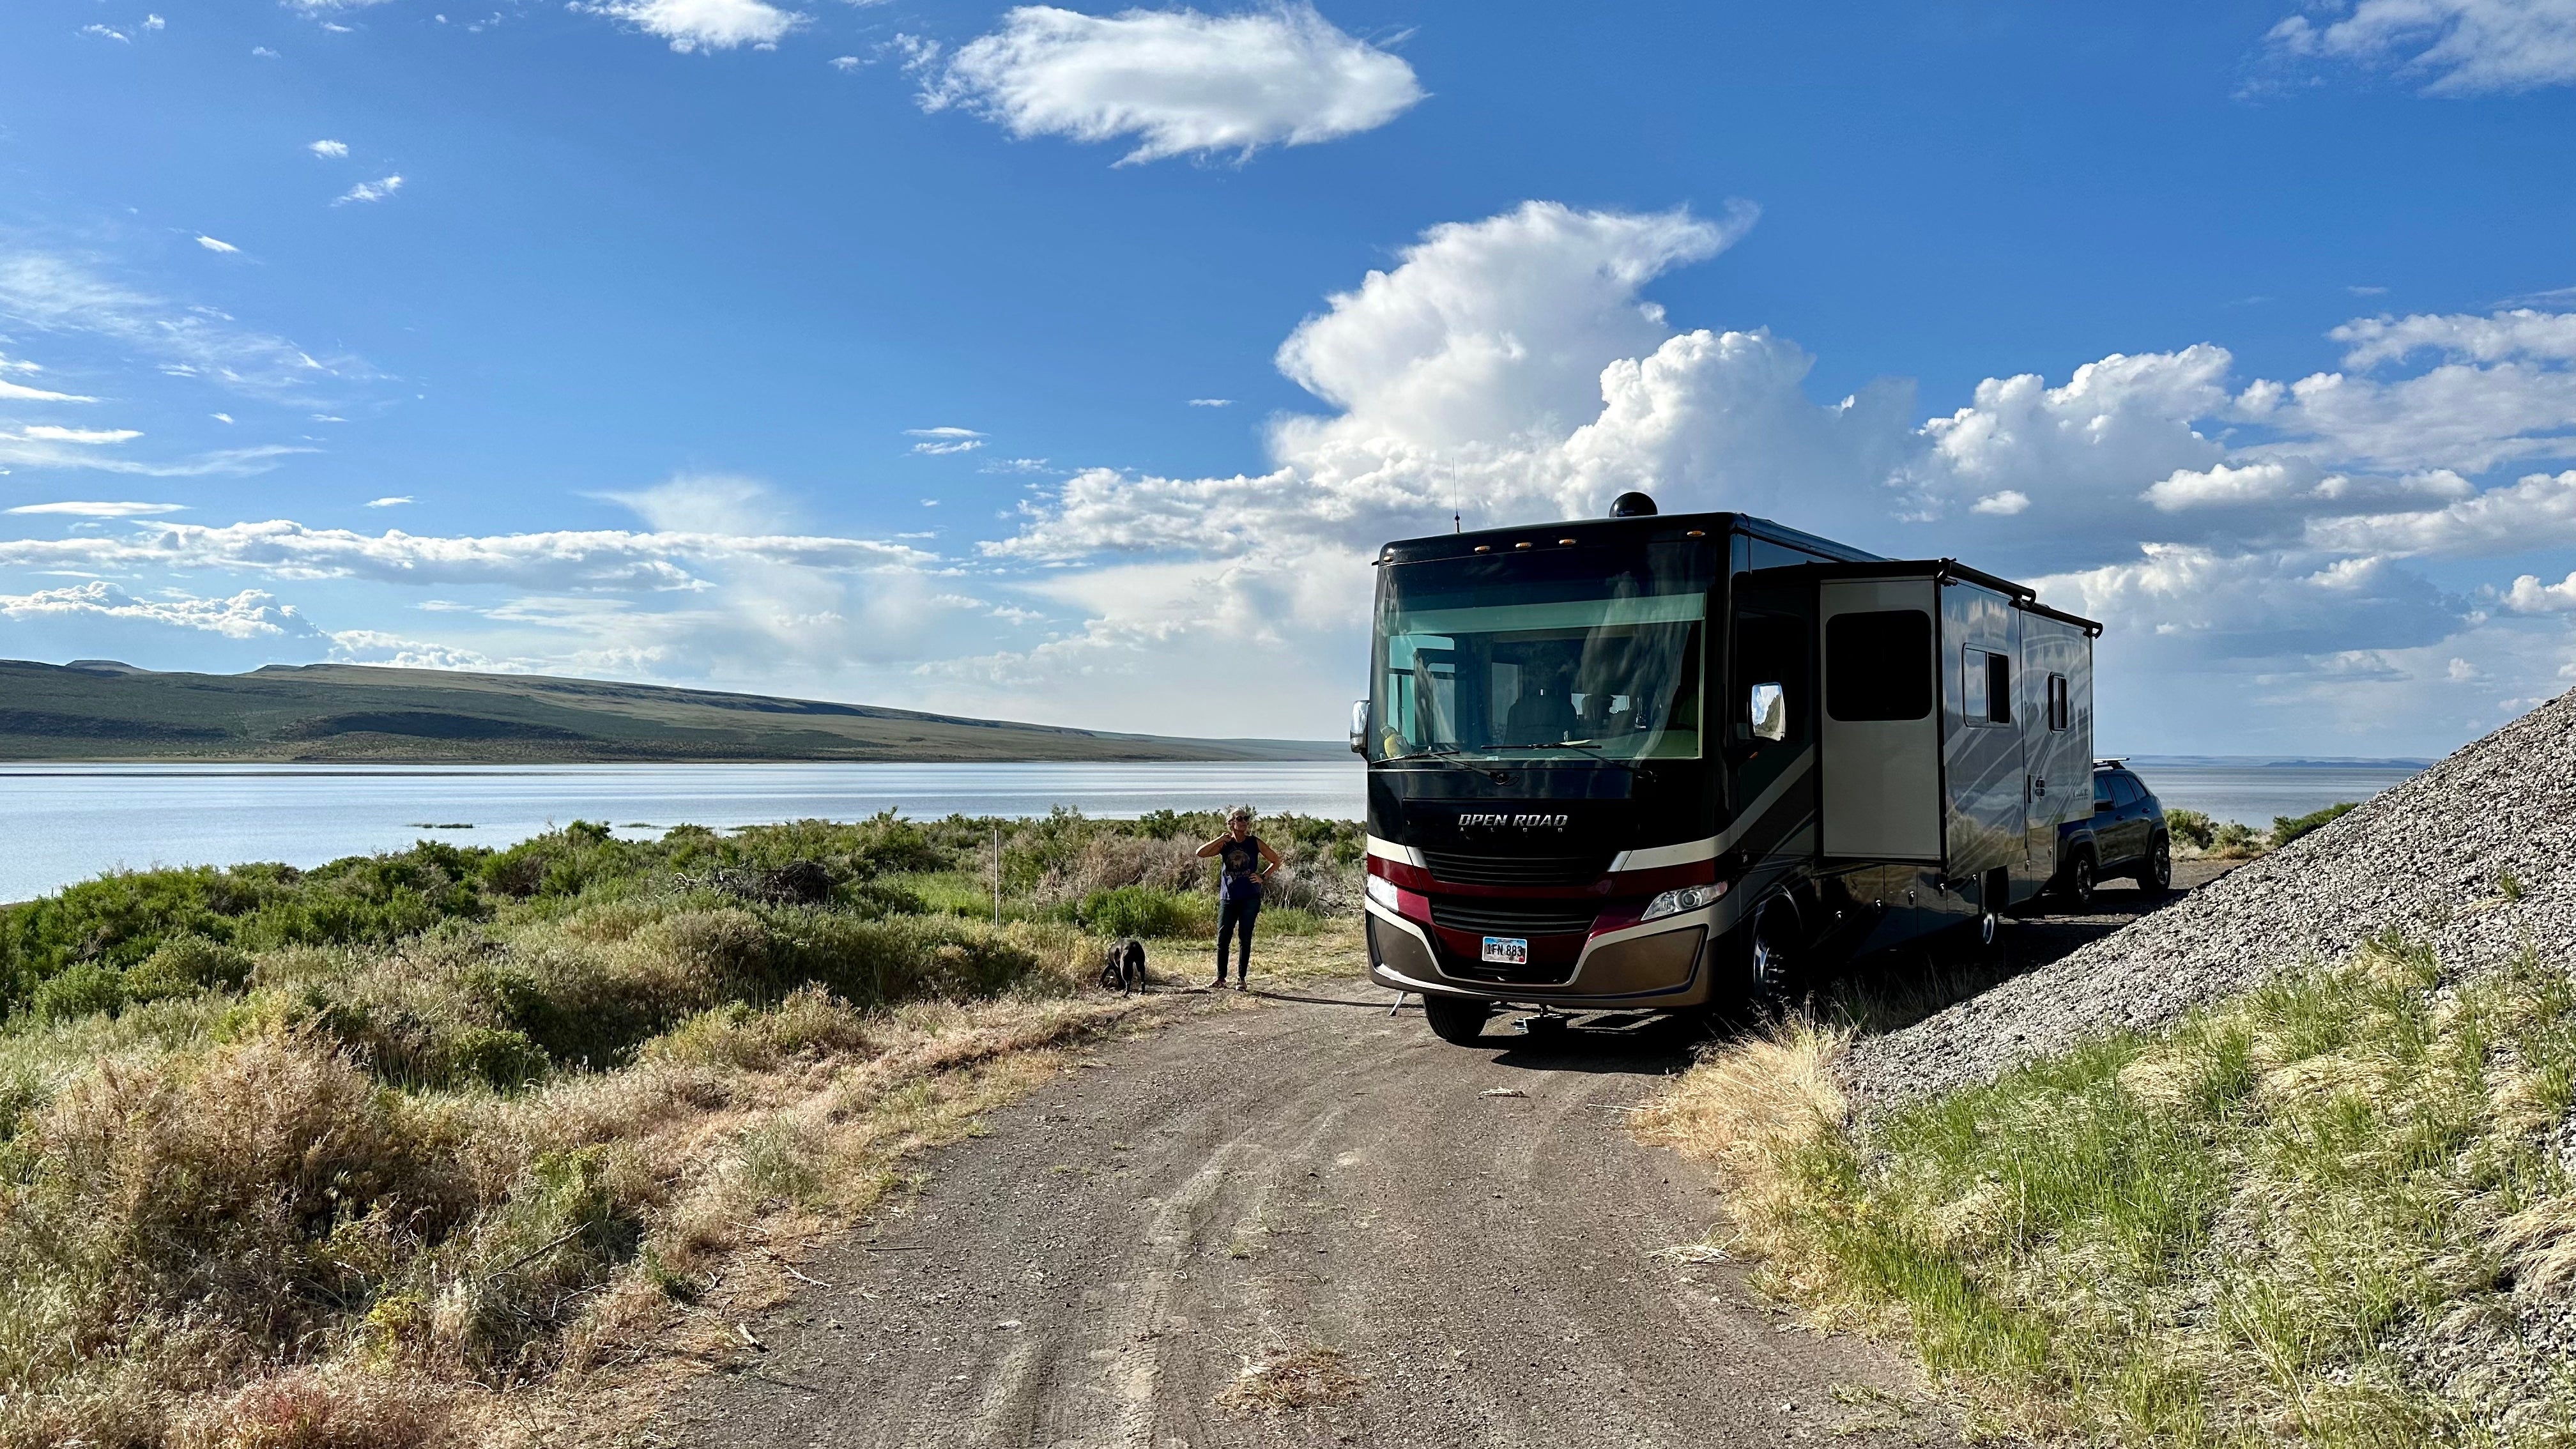 Camper submitted image from Lake Abert US 395 South Pullout Dispersed Camping - 5